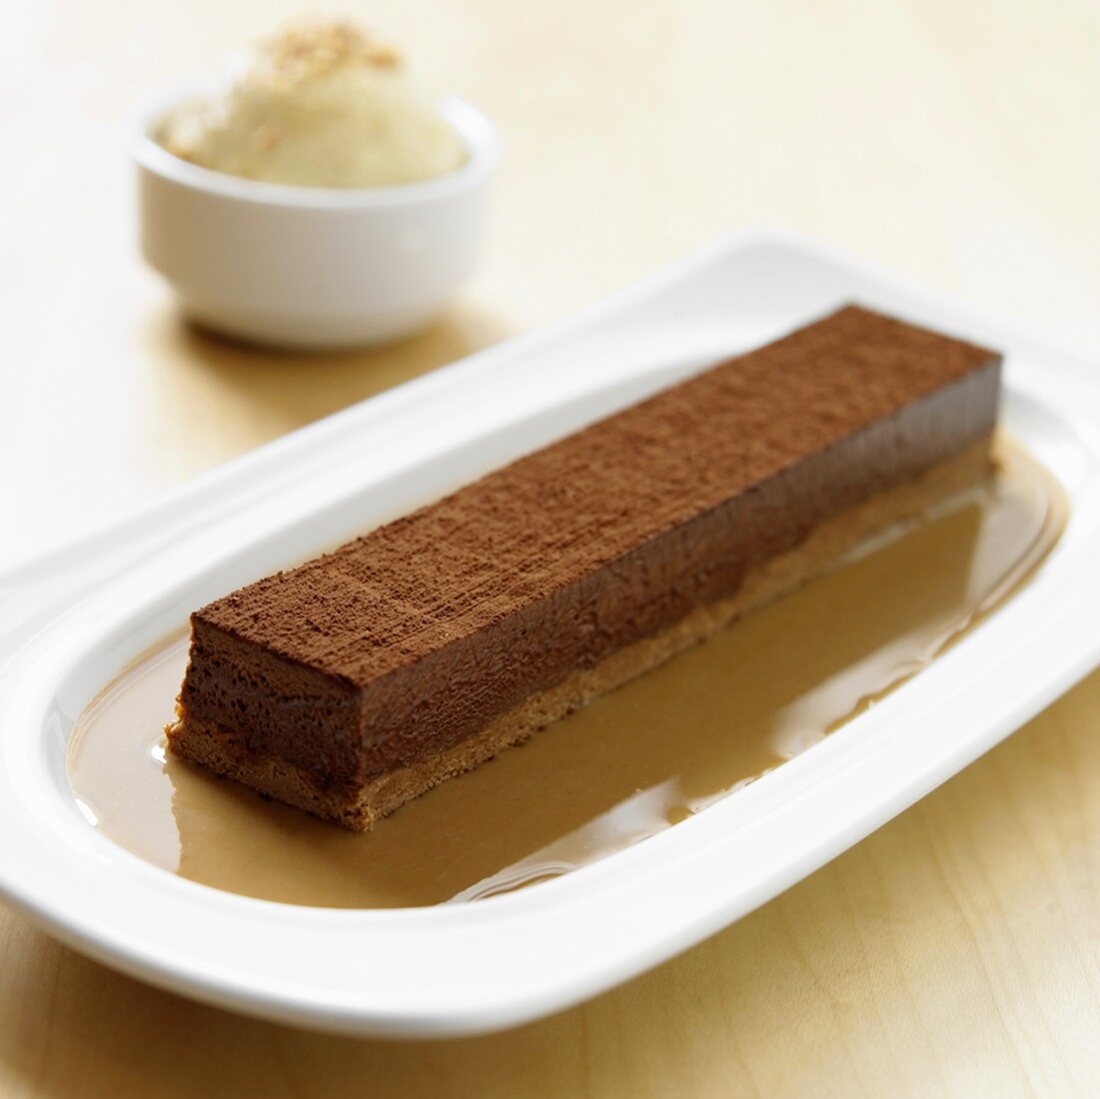 Chocolate Mousse Bar in Coffe Sauce with Vanilla Ice Cream